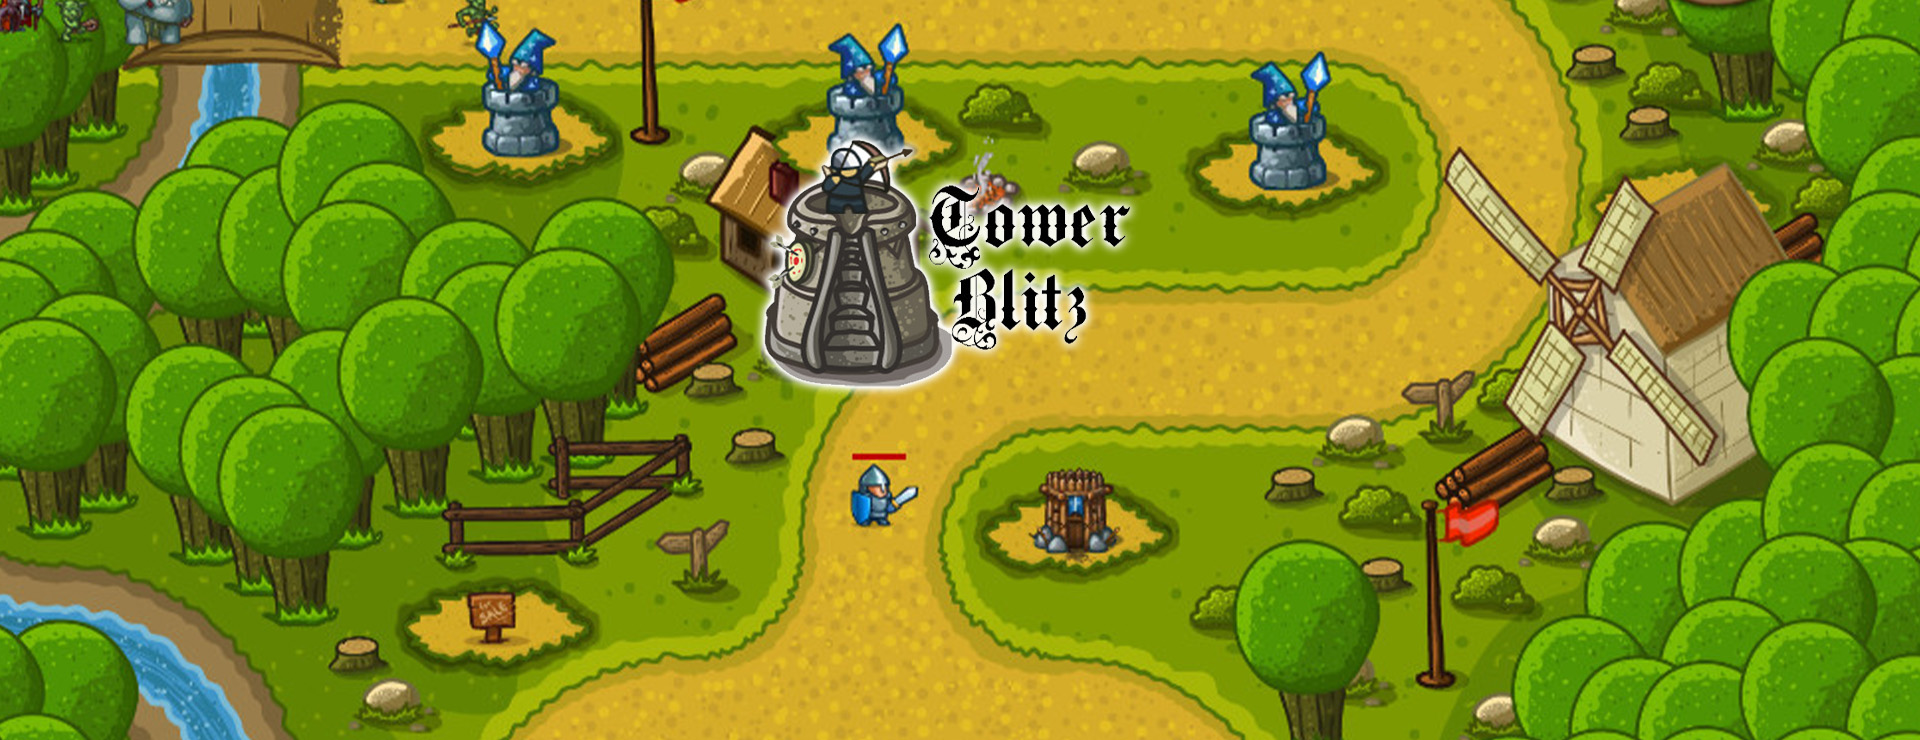 Tower Blitz - Strategy Game